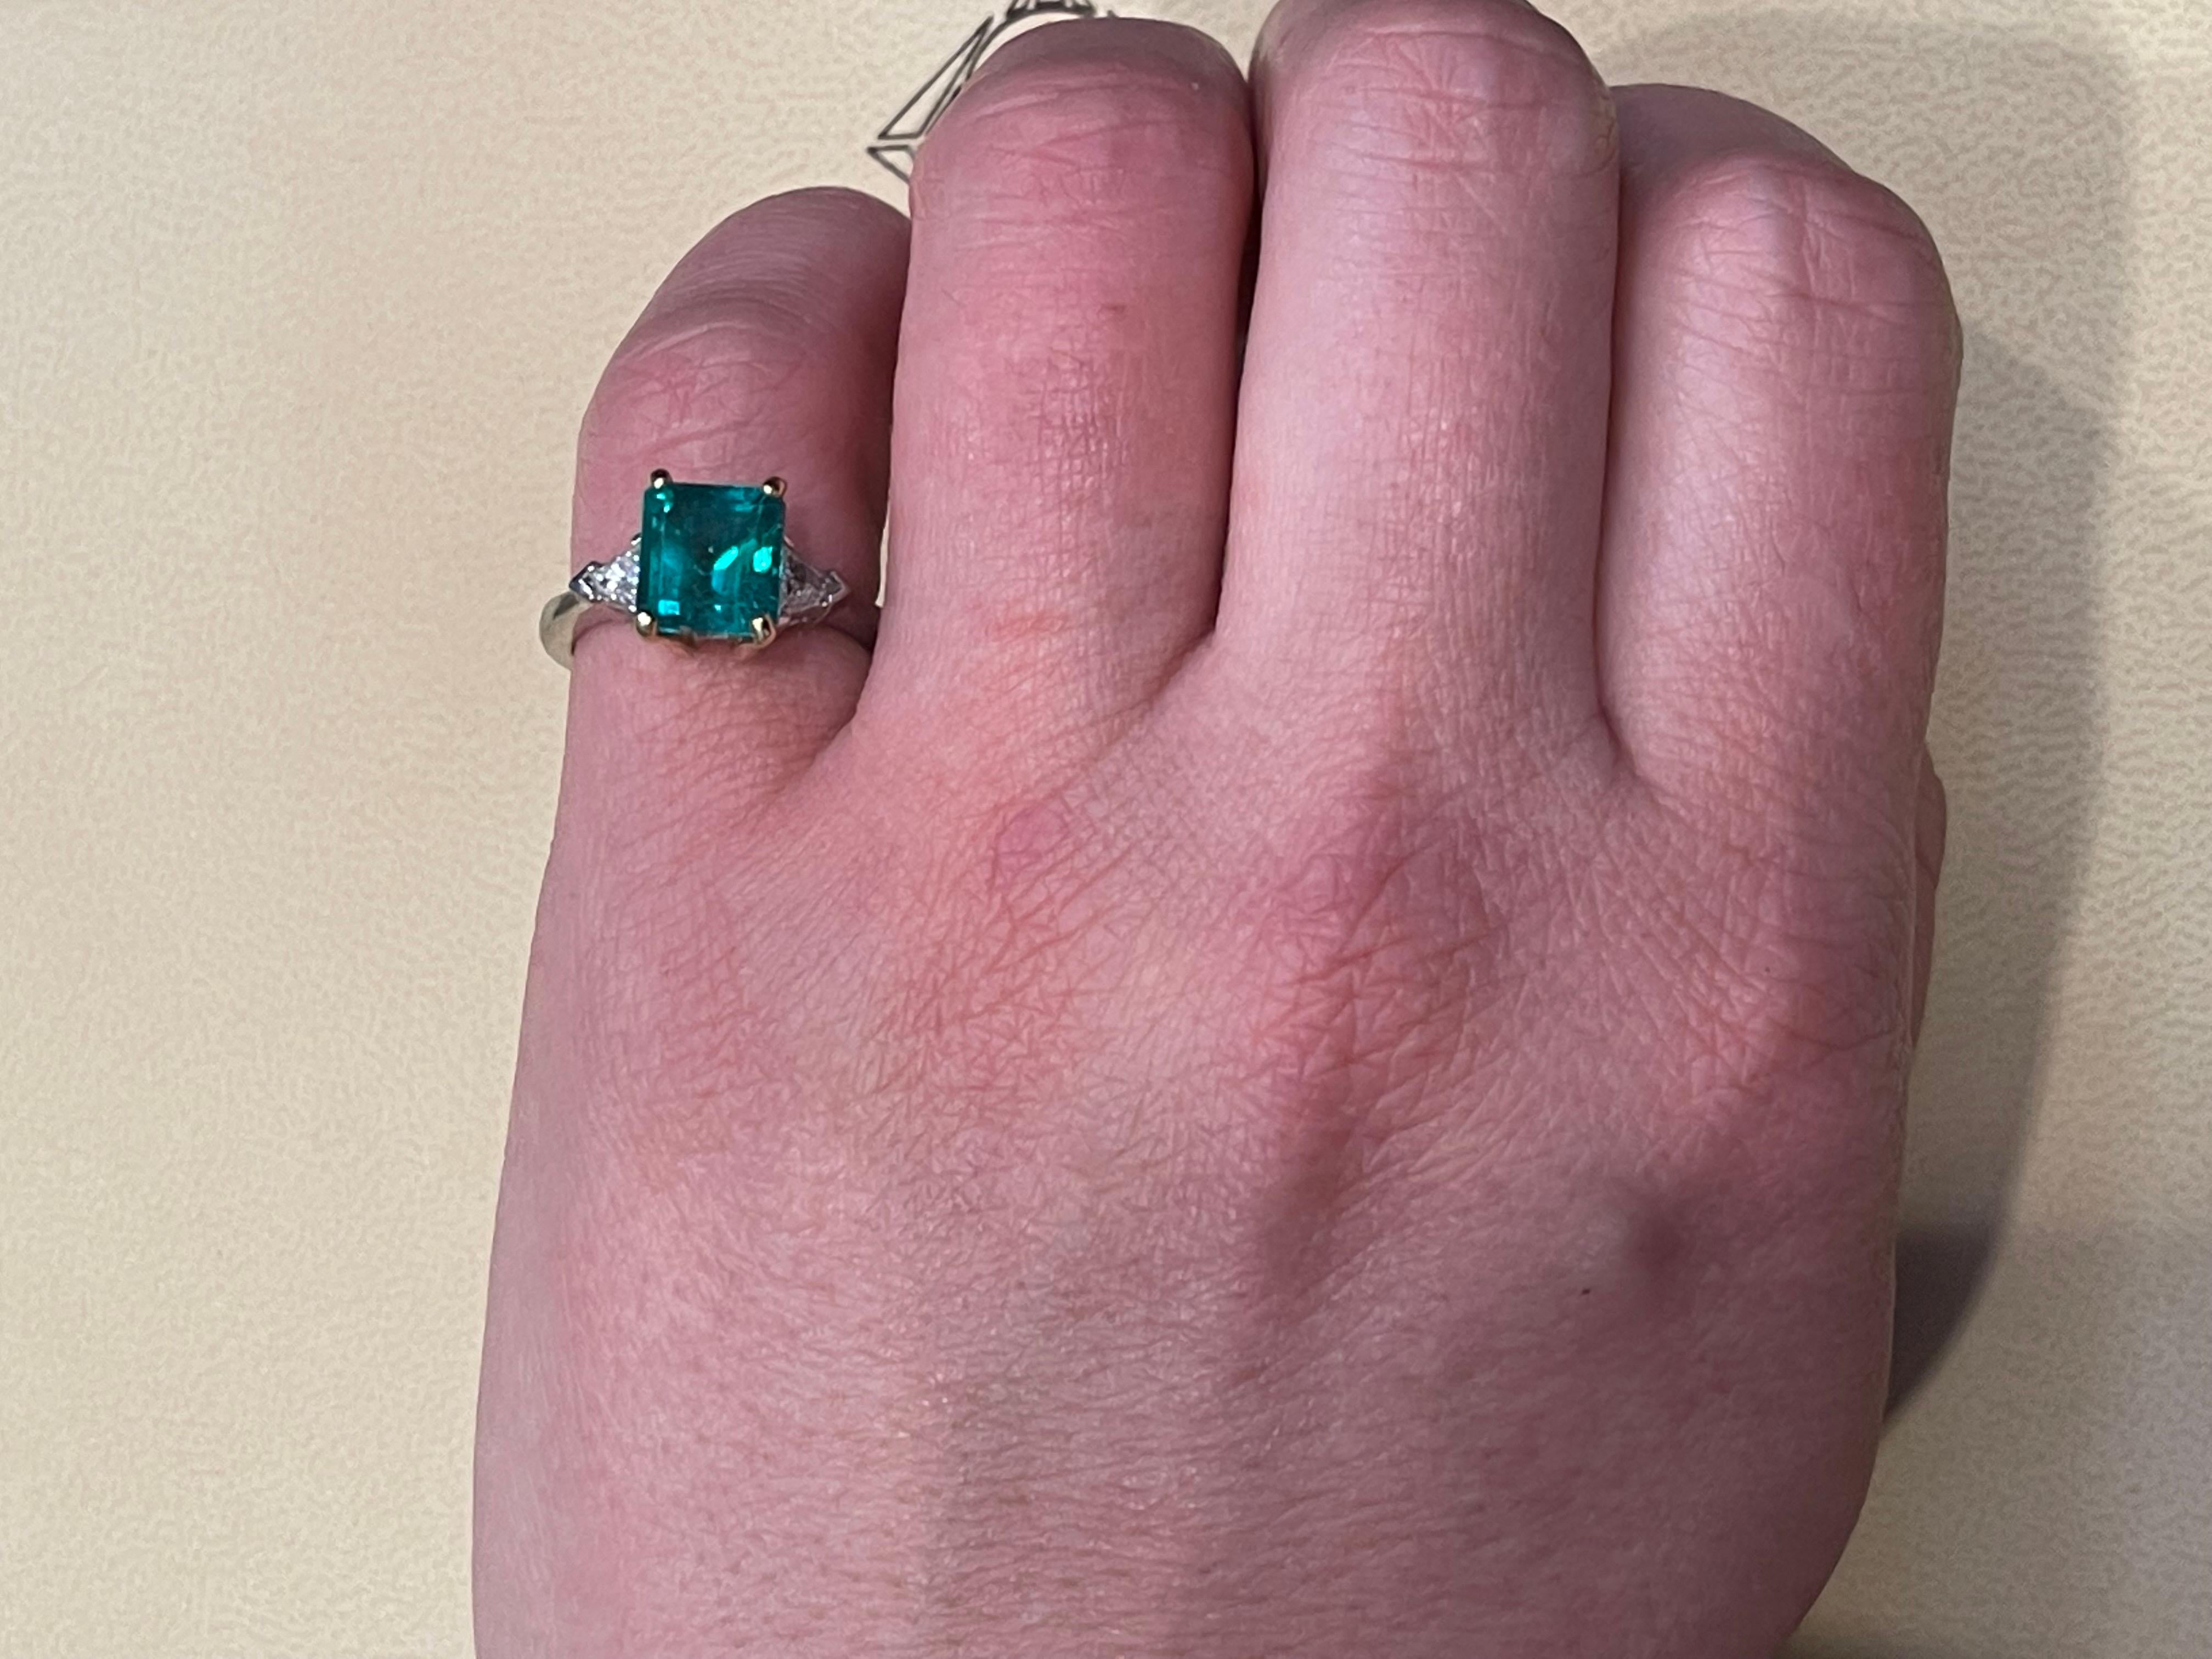 2.7 Carat Emerald Cut Colombian Emerald & 0.60Ct Diamond Ring 18K White/Y Gold For Sale 4